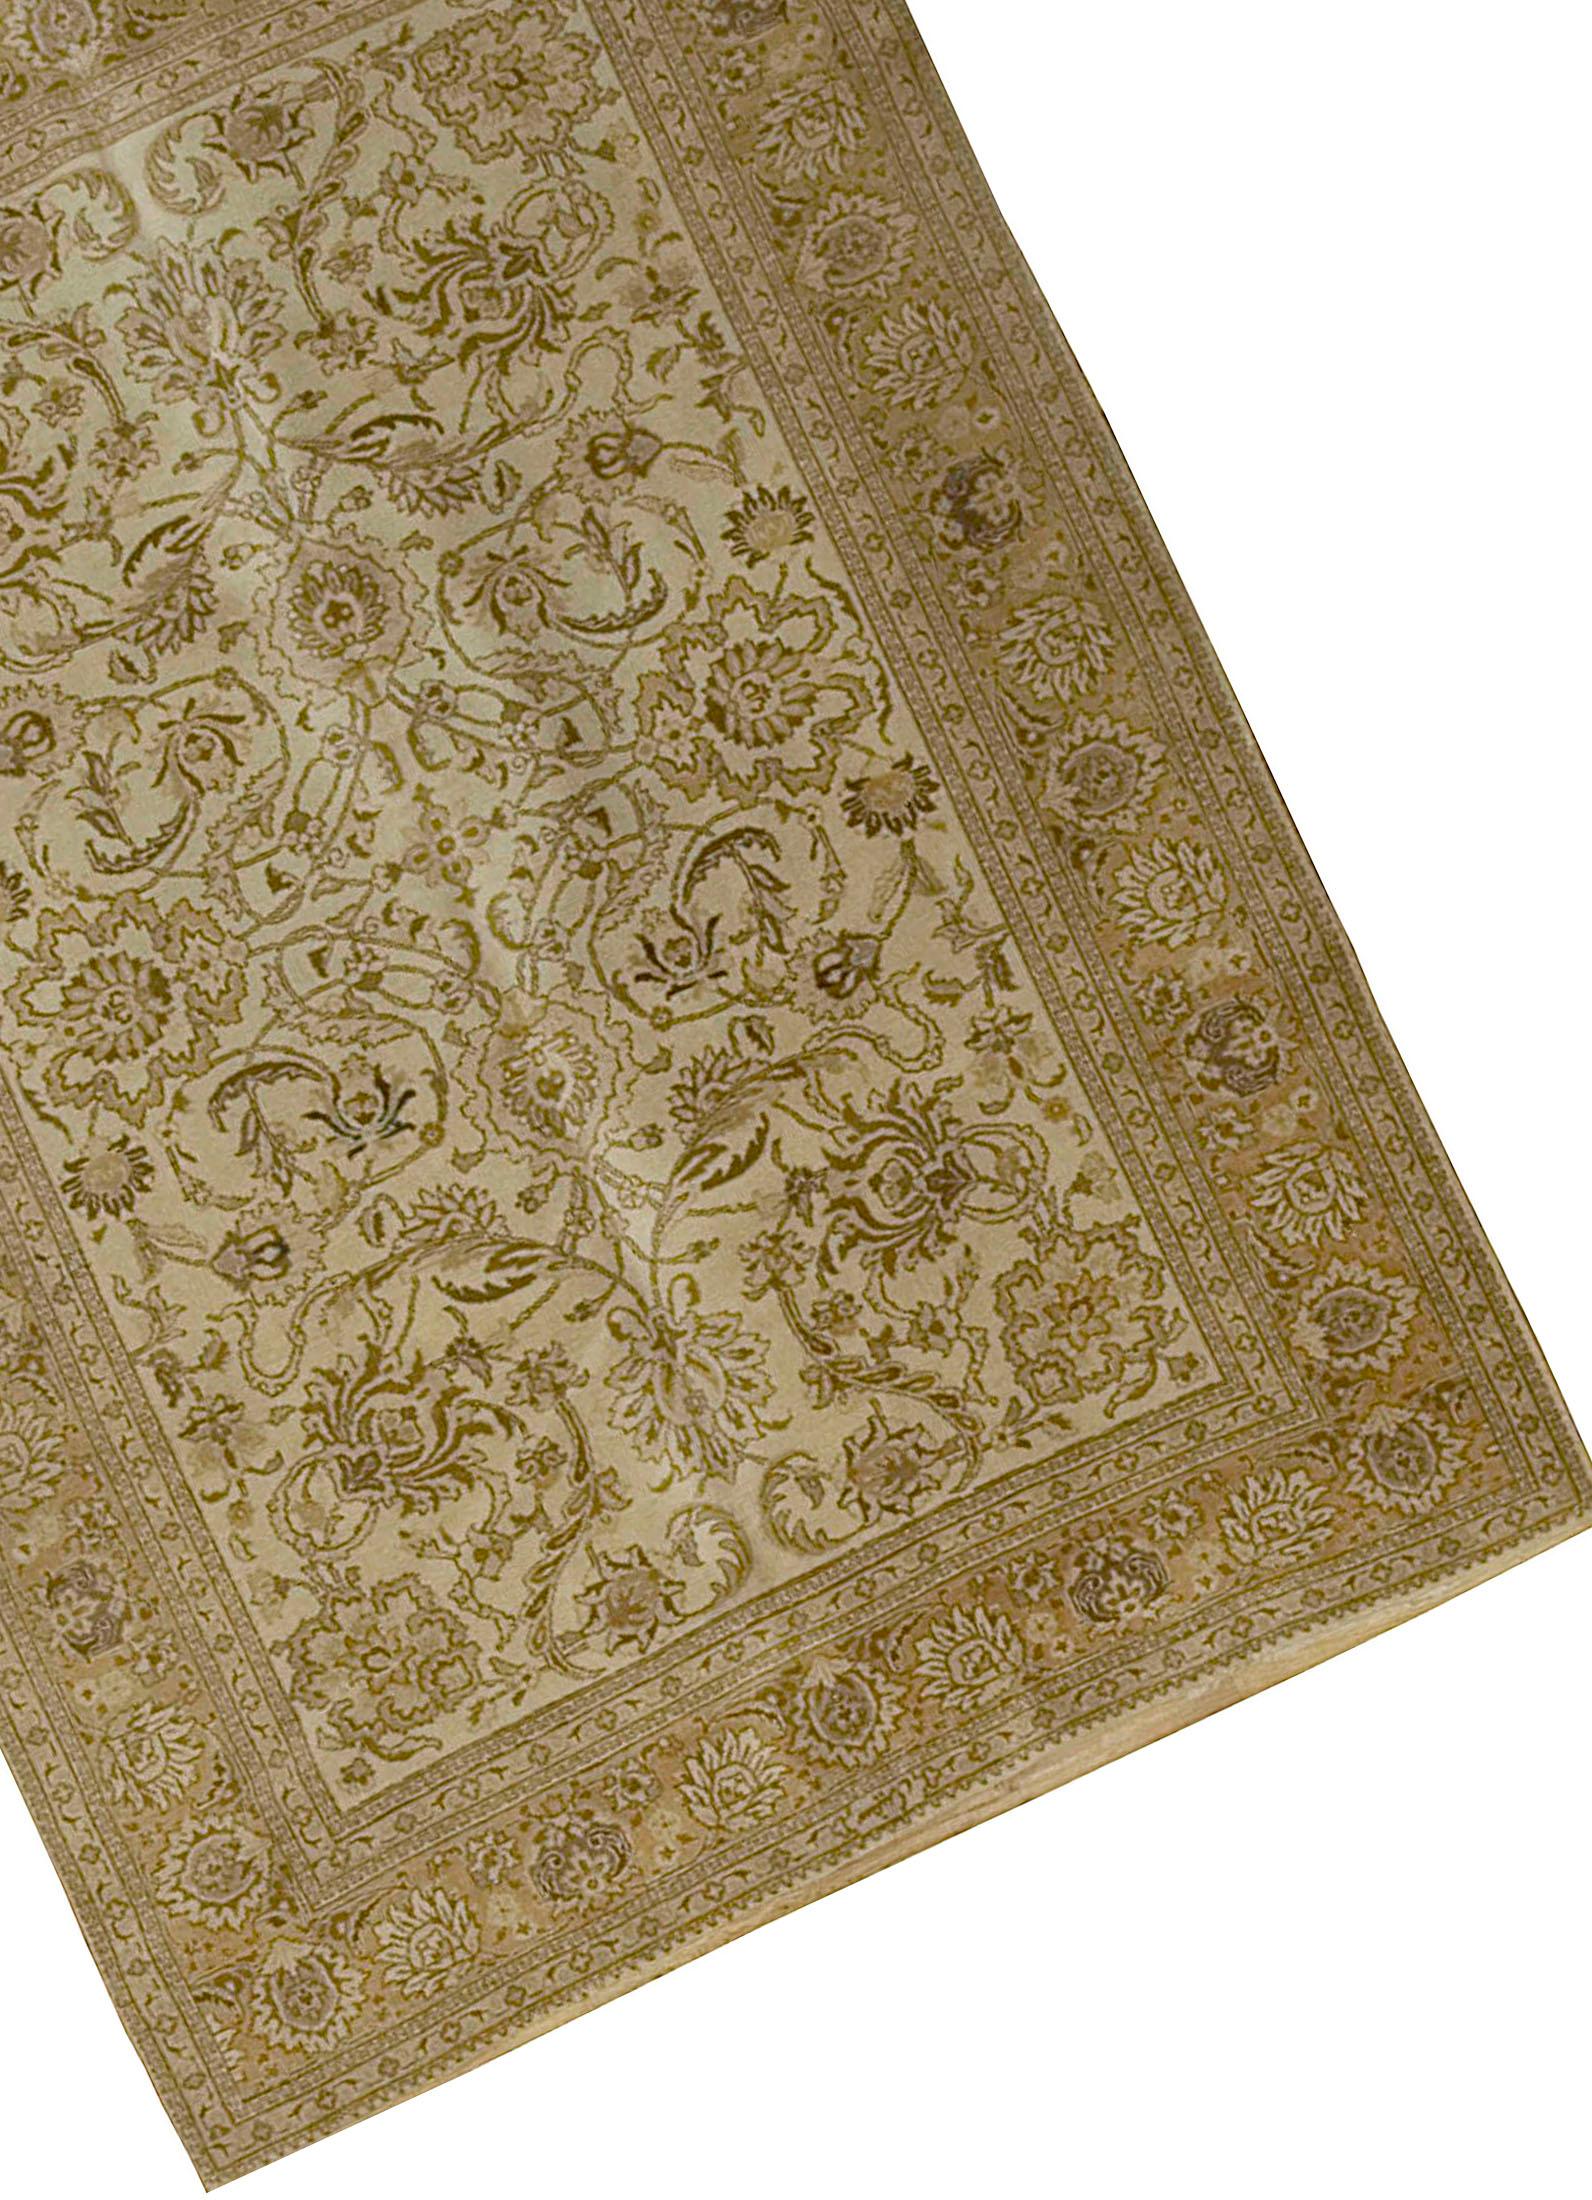 Antique Persian Tabriz Circa 1920 6'9 x 9'3. From Tabriz in Persia this is a classic vintage piece that will enhance any room setting. Colors: ivory/beige/browns.